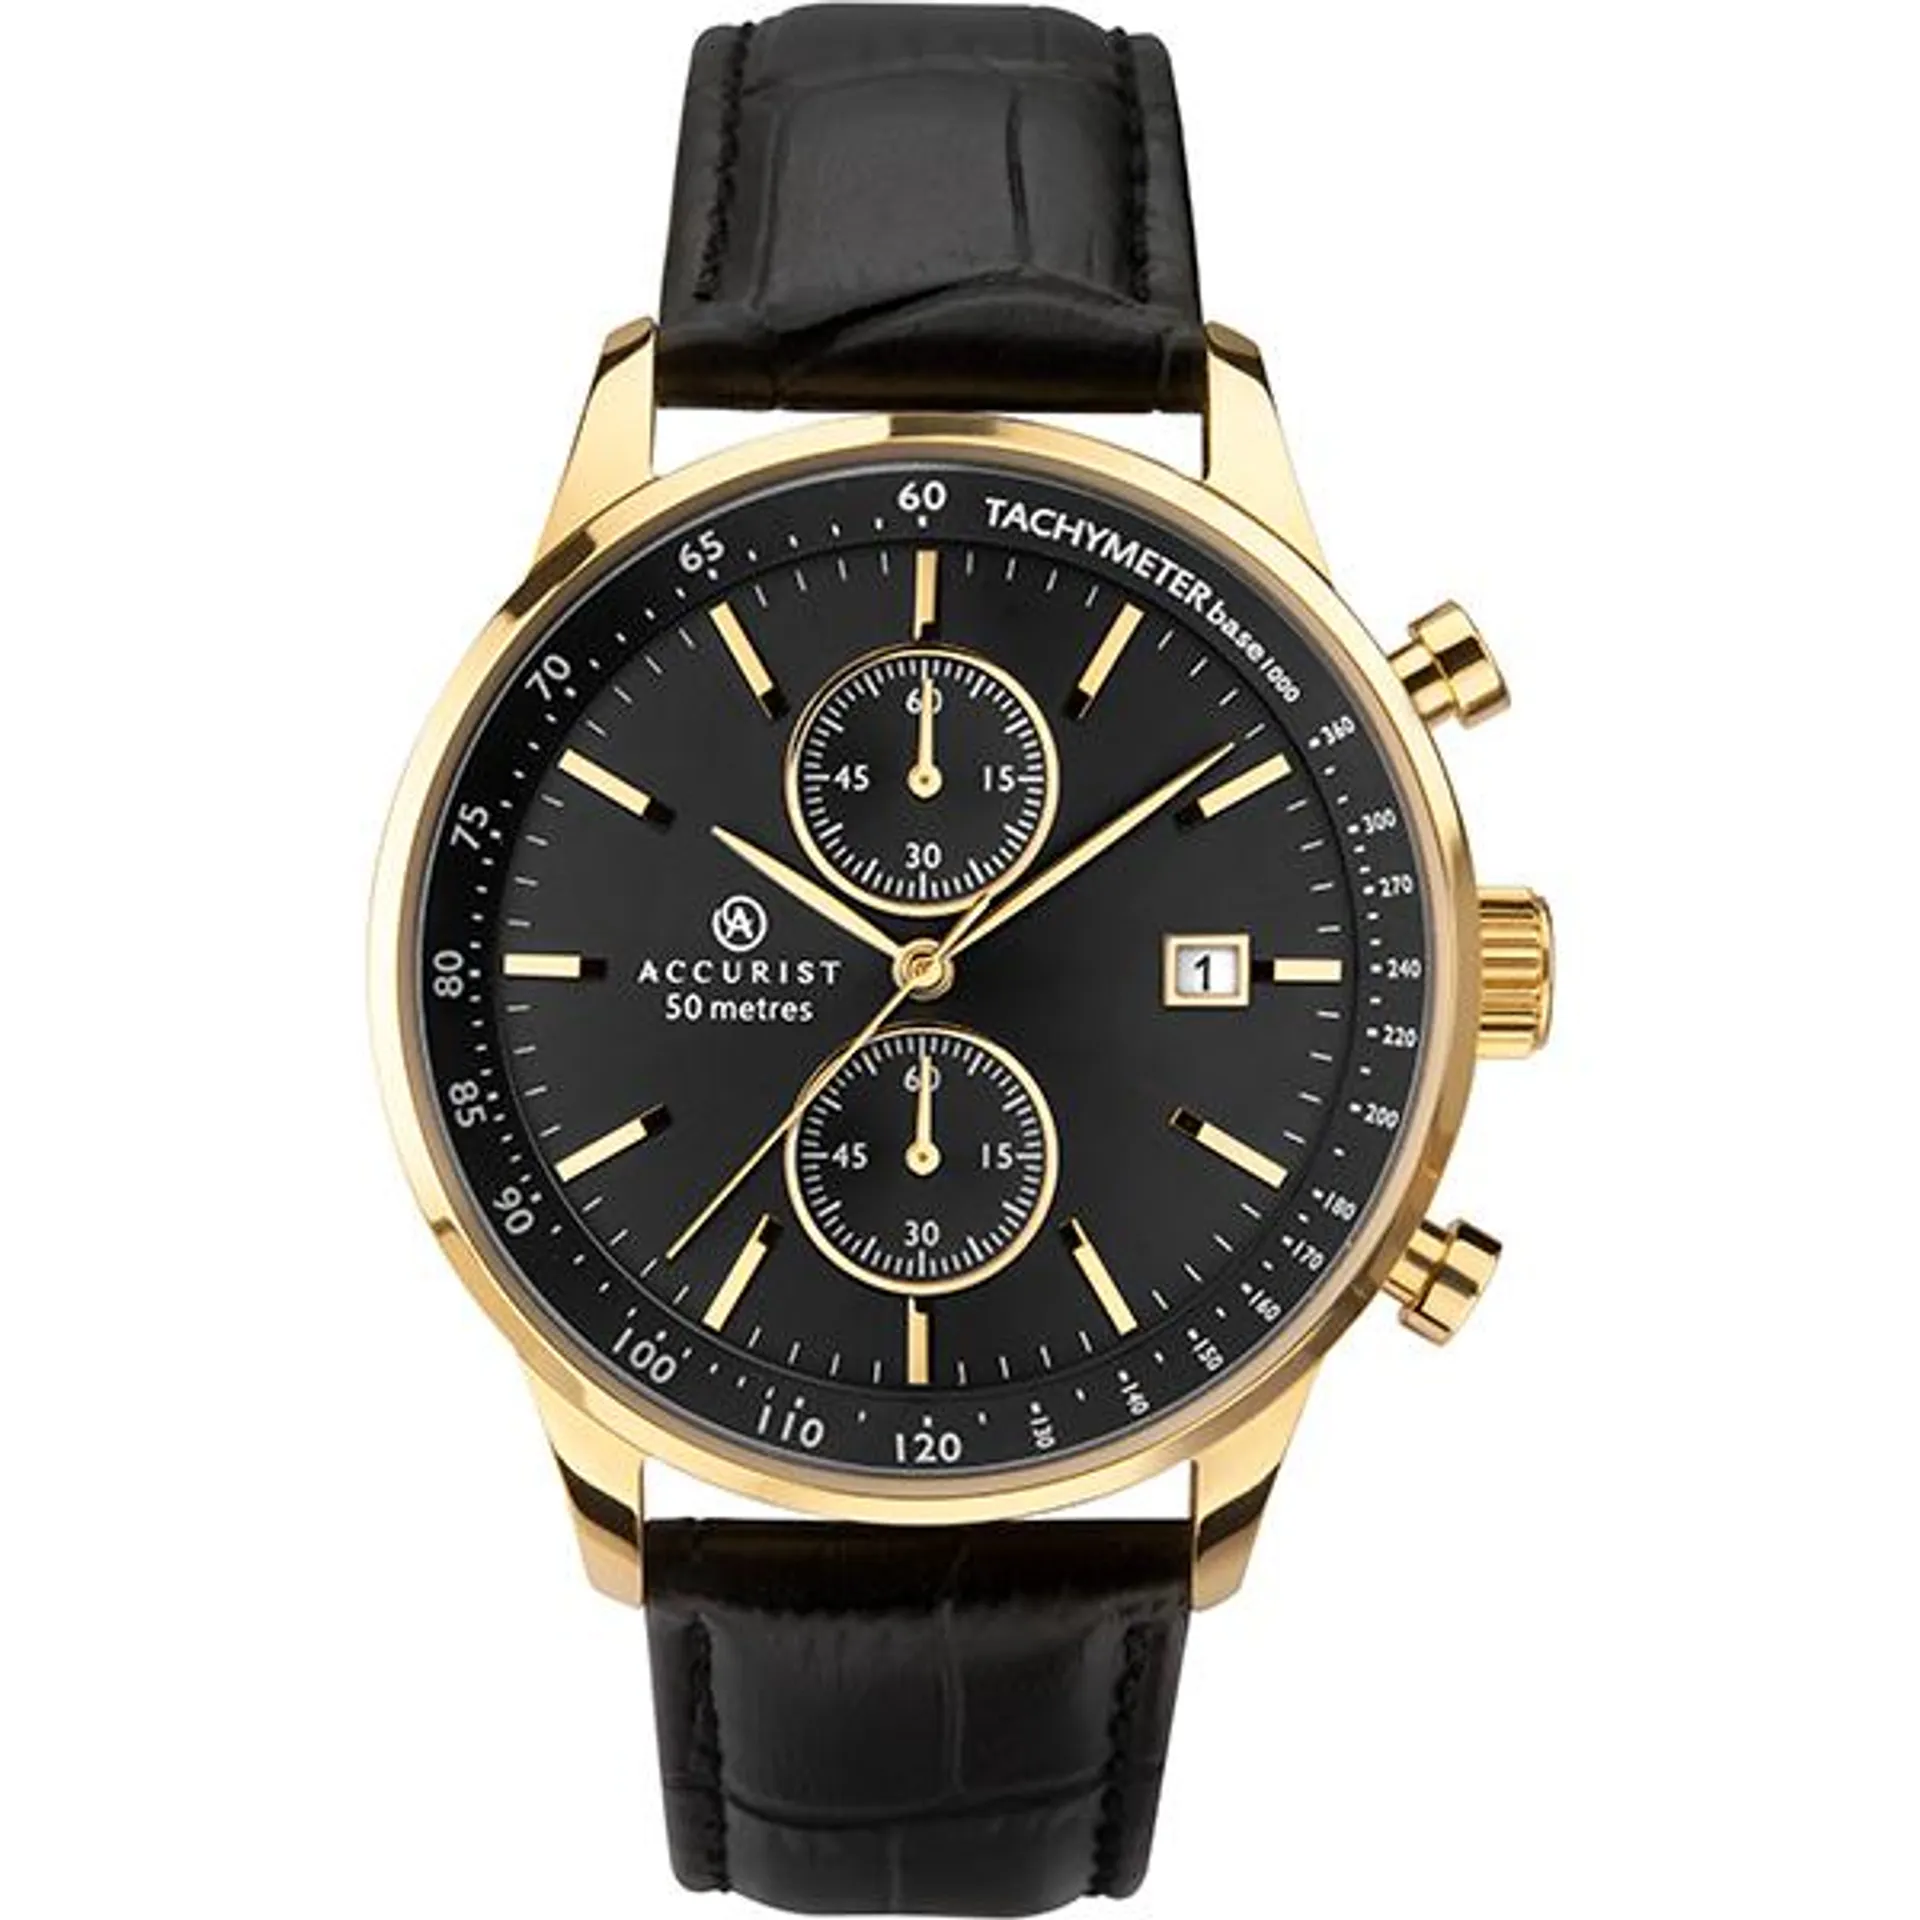 Accurist Gents Chronograph Watch with Genuine Leather Strap